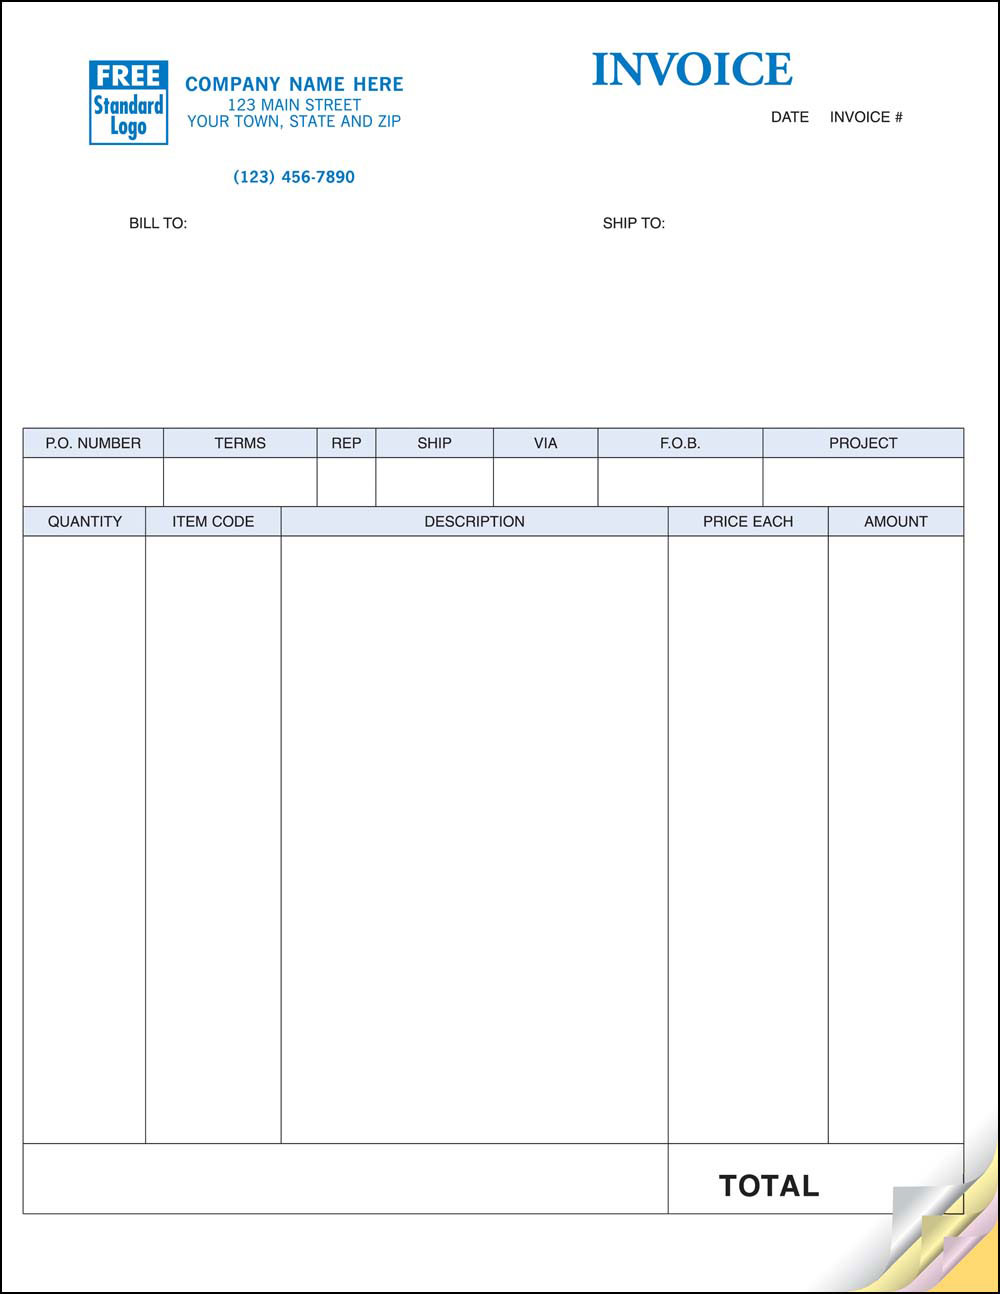 Laser Invoice, 1 Copy - PERSONALIZED - Click Image to Close